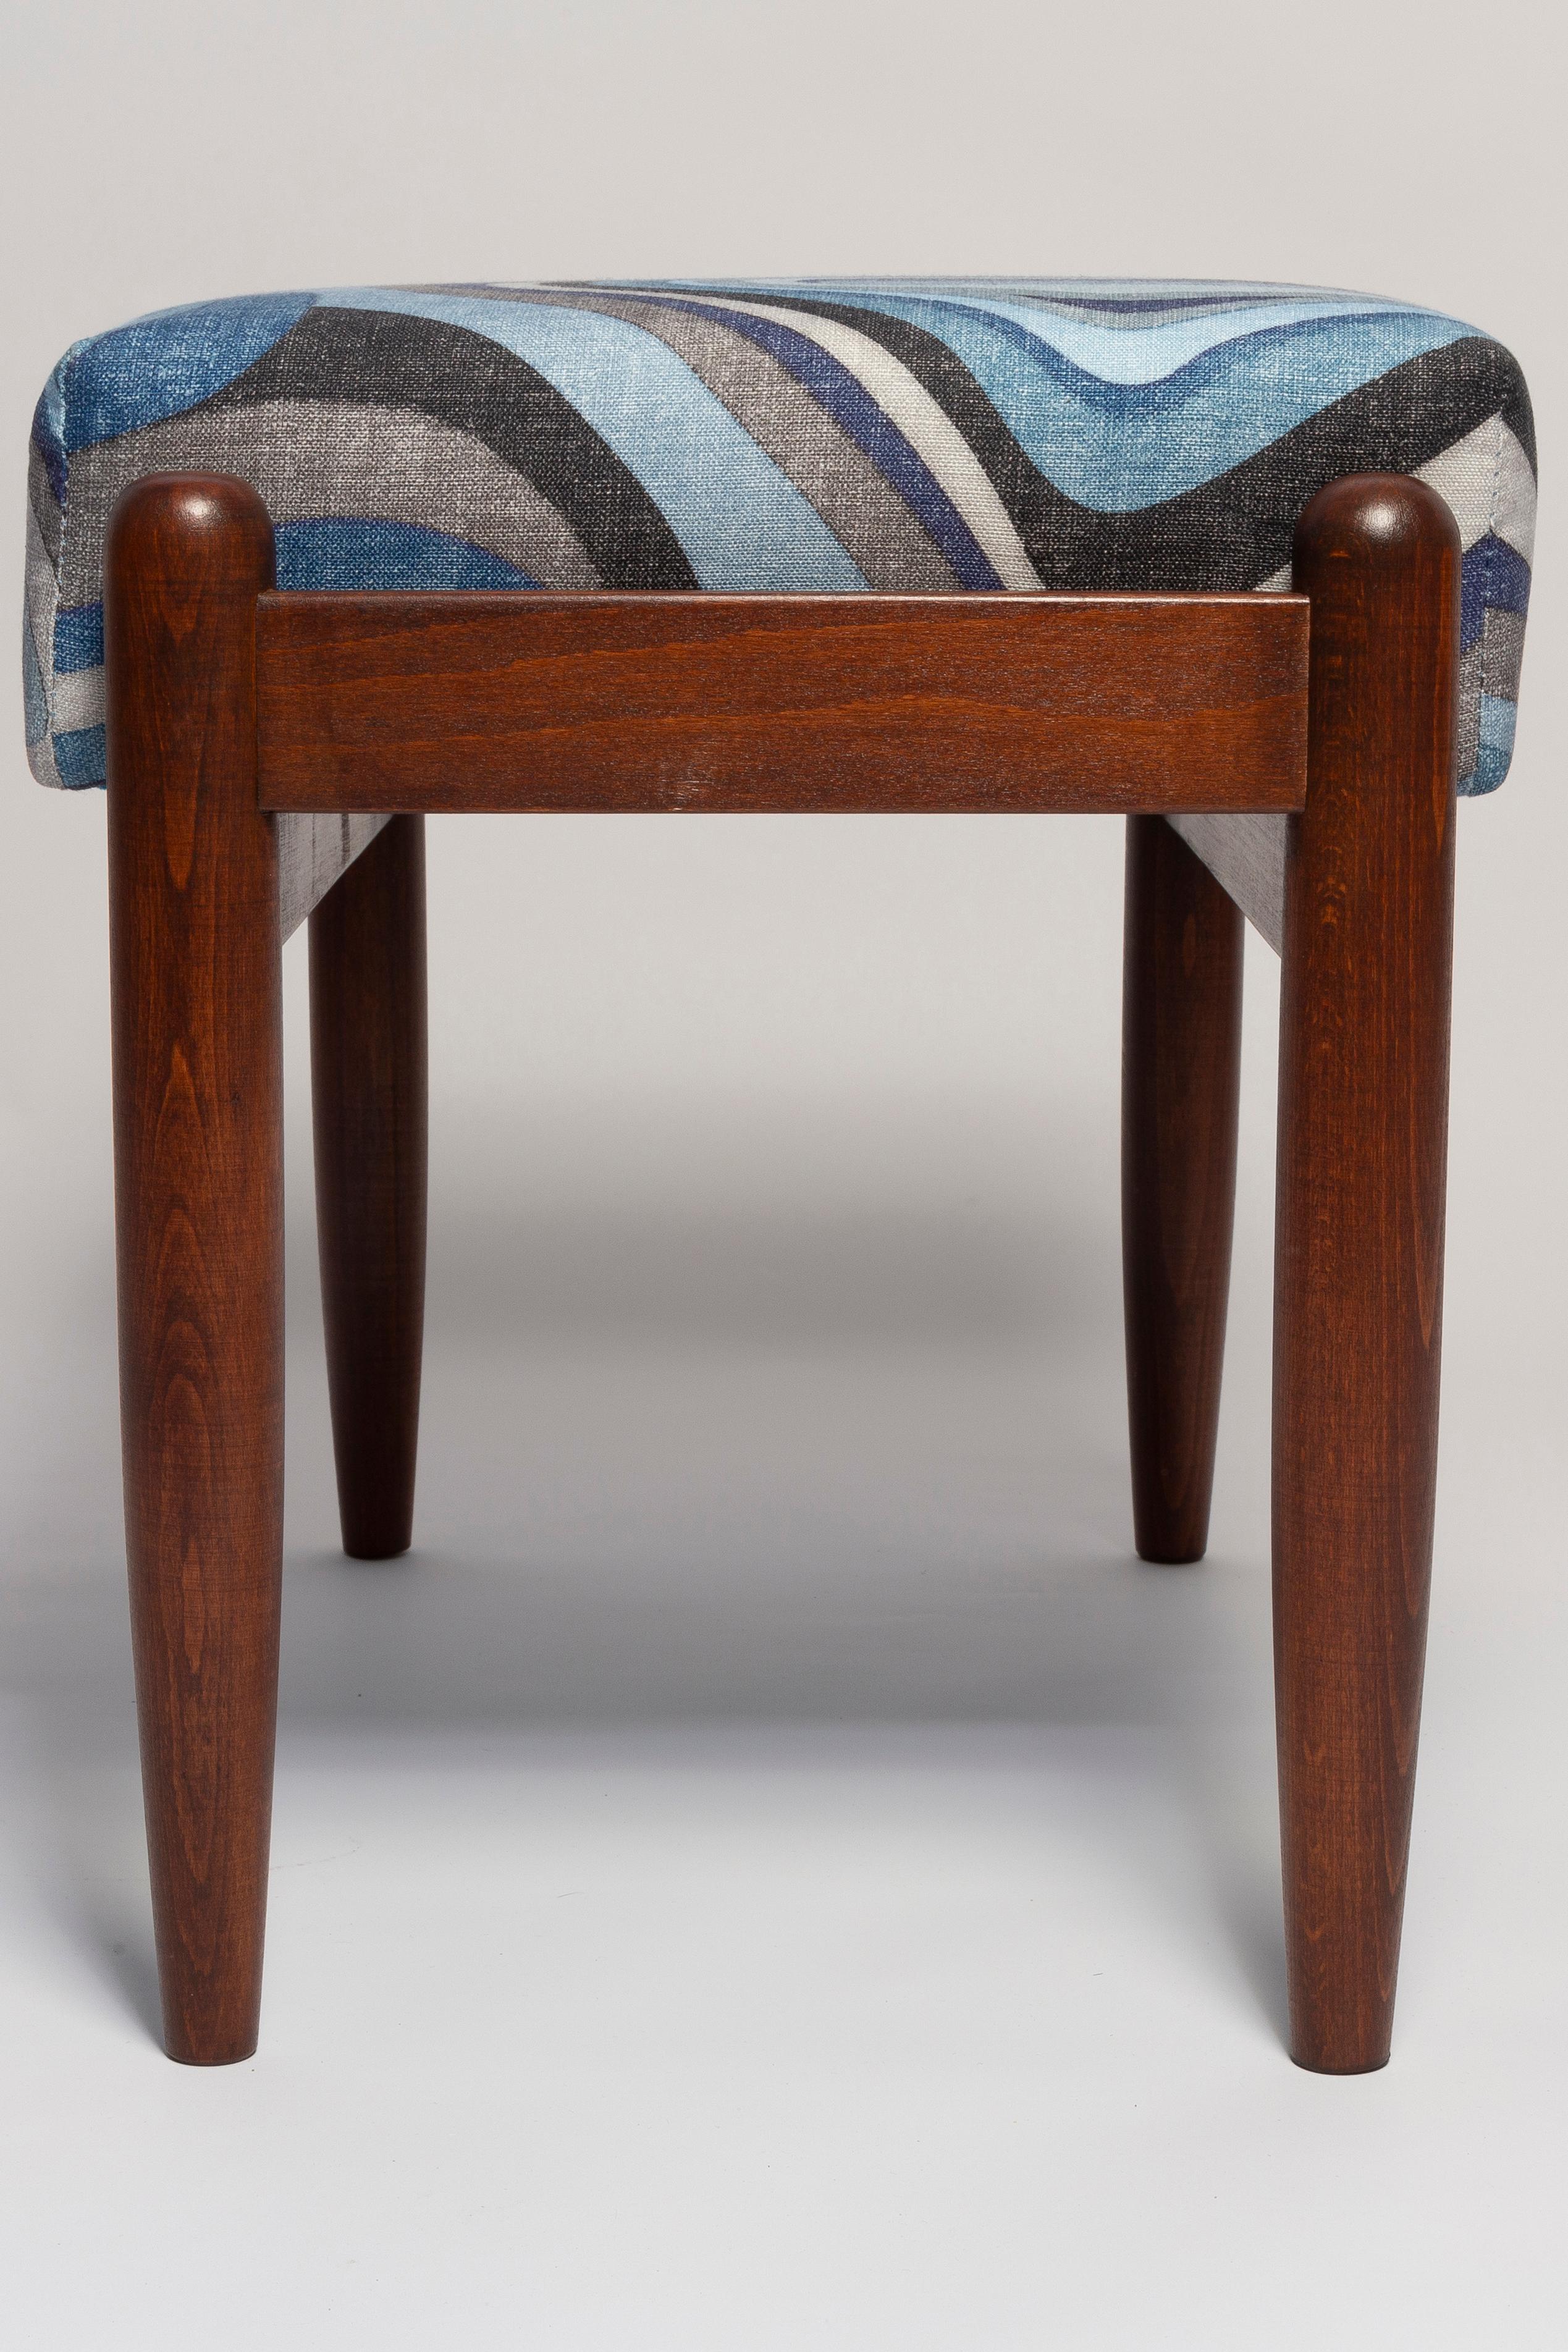 Hand-Crafted Blue Linen Mid Century GFM Stool, Edmund Homa, Europe, 1960s For Sale